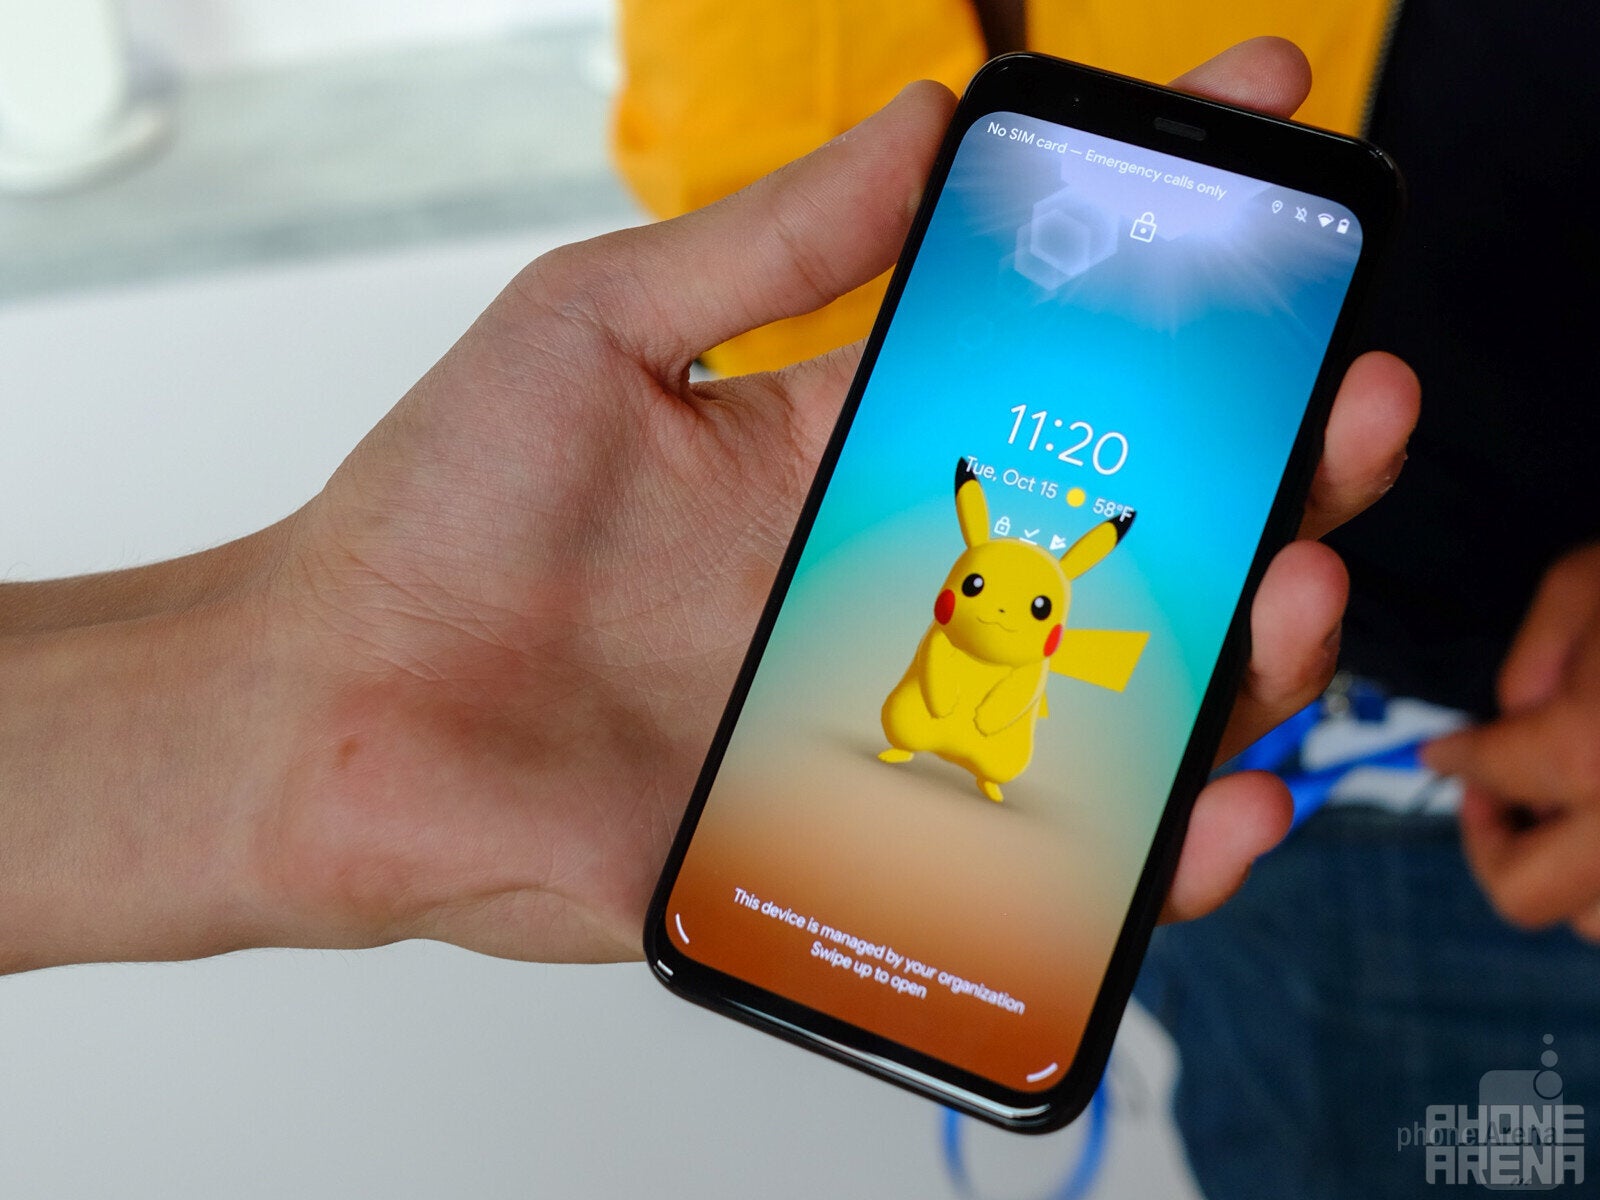 If you wave at Pikachu on the Pixel 4, he&#039;ll wave back! - Google Pixel 4 &amp; Pixel 4 XL hands-on